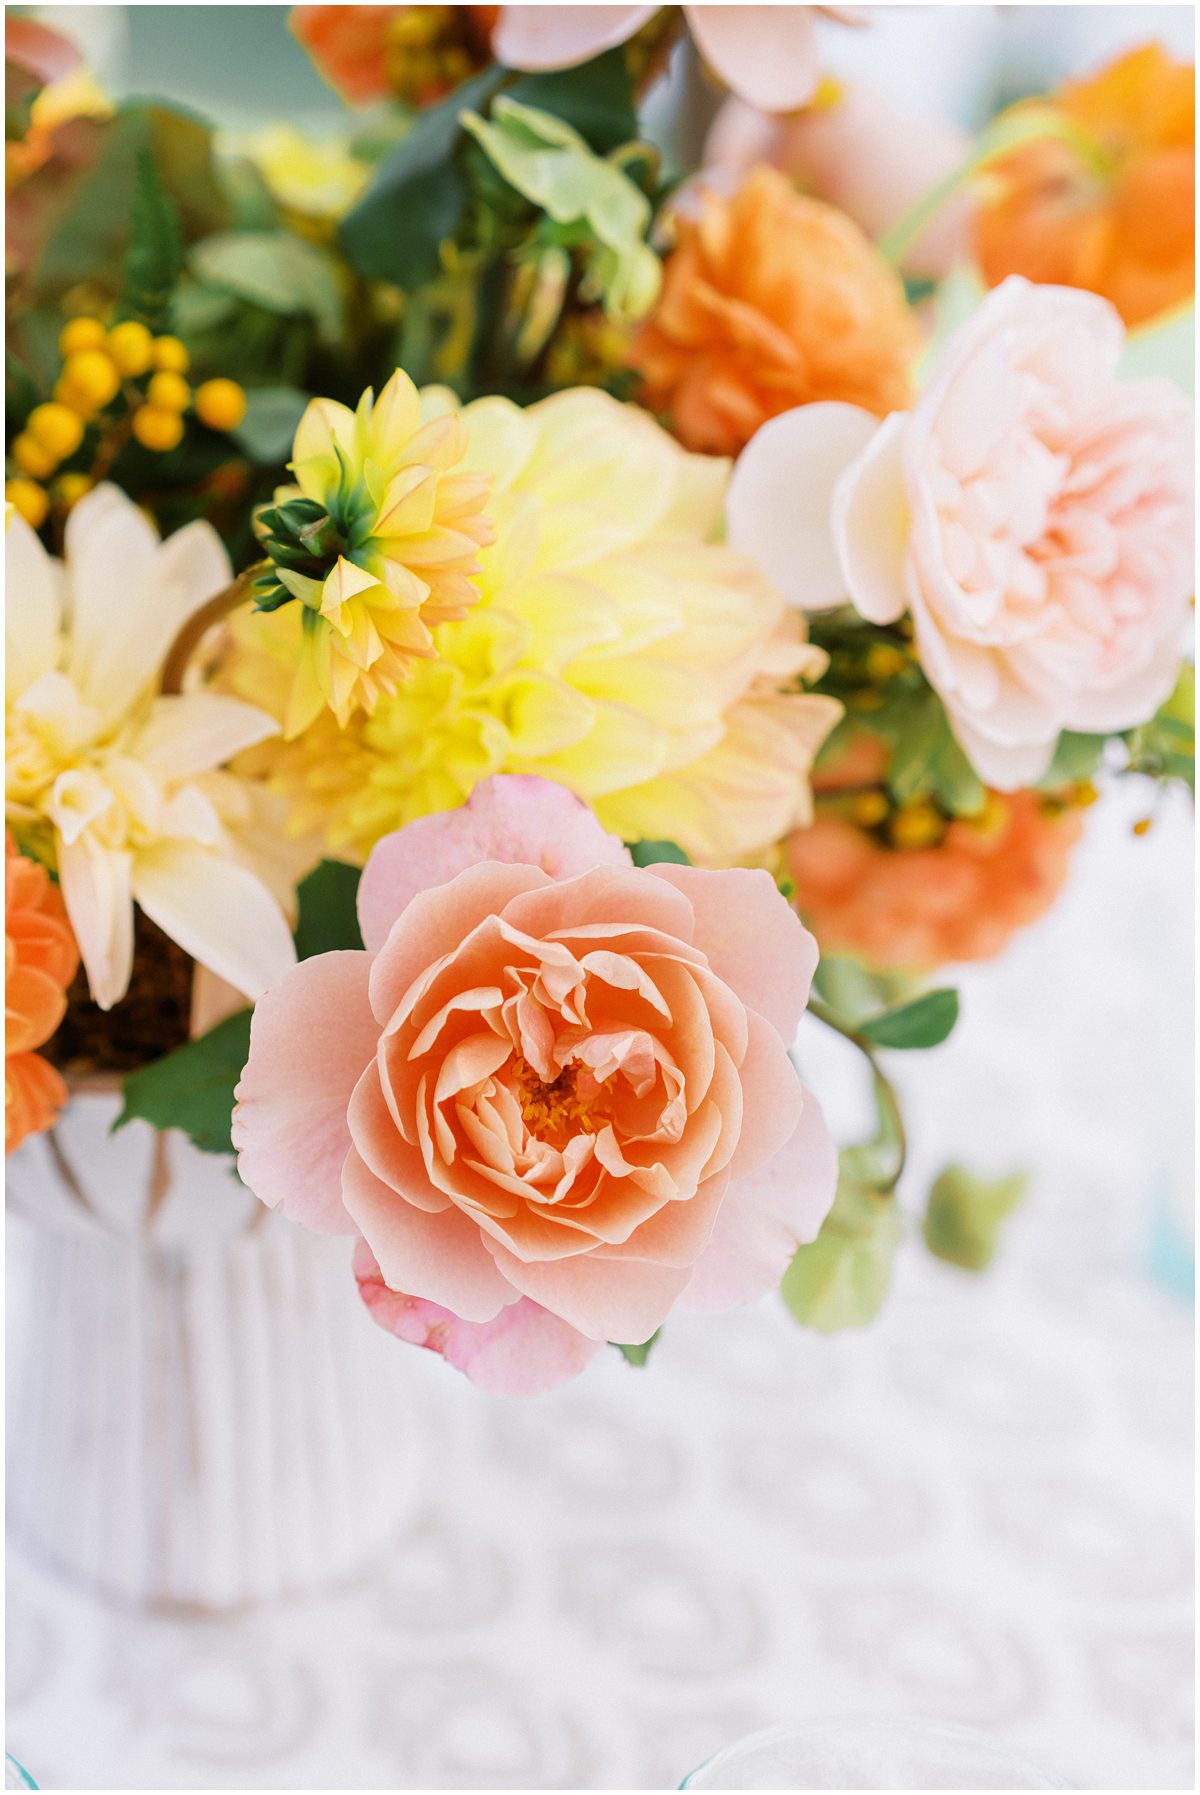 Pink, yellow, and orange flowers for a romantic fall wedding designed by Tailor and Table